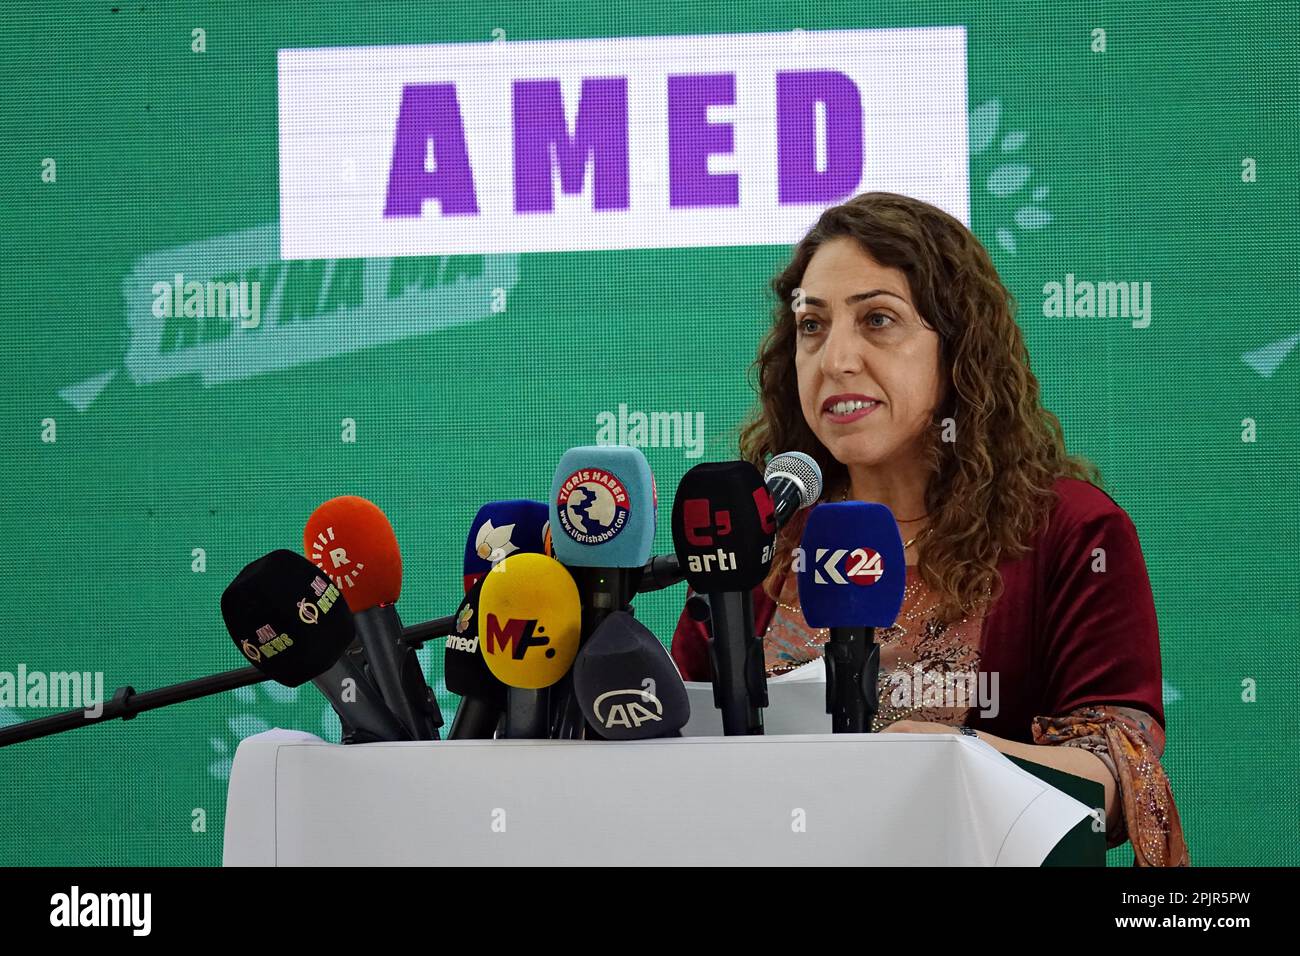 Saliha Ayyildiz, Co-Leader of the Democratic Regions Party (DBP) speaks during the press conference. Turkey's 'Kurdish Alliance for Freedom and Democracy' announced that they will support the Green Left Party, which opposes President Recep Tayyip Erdogan, in the May 14 elections.The 'Kurdish Alliance for Freedom and Democracy', established by the Green Left Party with Kurdish parties and organizations in Turkey, announced its position on the May 14 elections with a declaration at a salon meeting held in Diyarbakir. In addition to the Green Left Party (YSP), the Democratic Society Congress (DTK Stock Photo